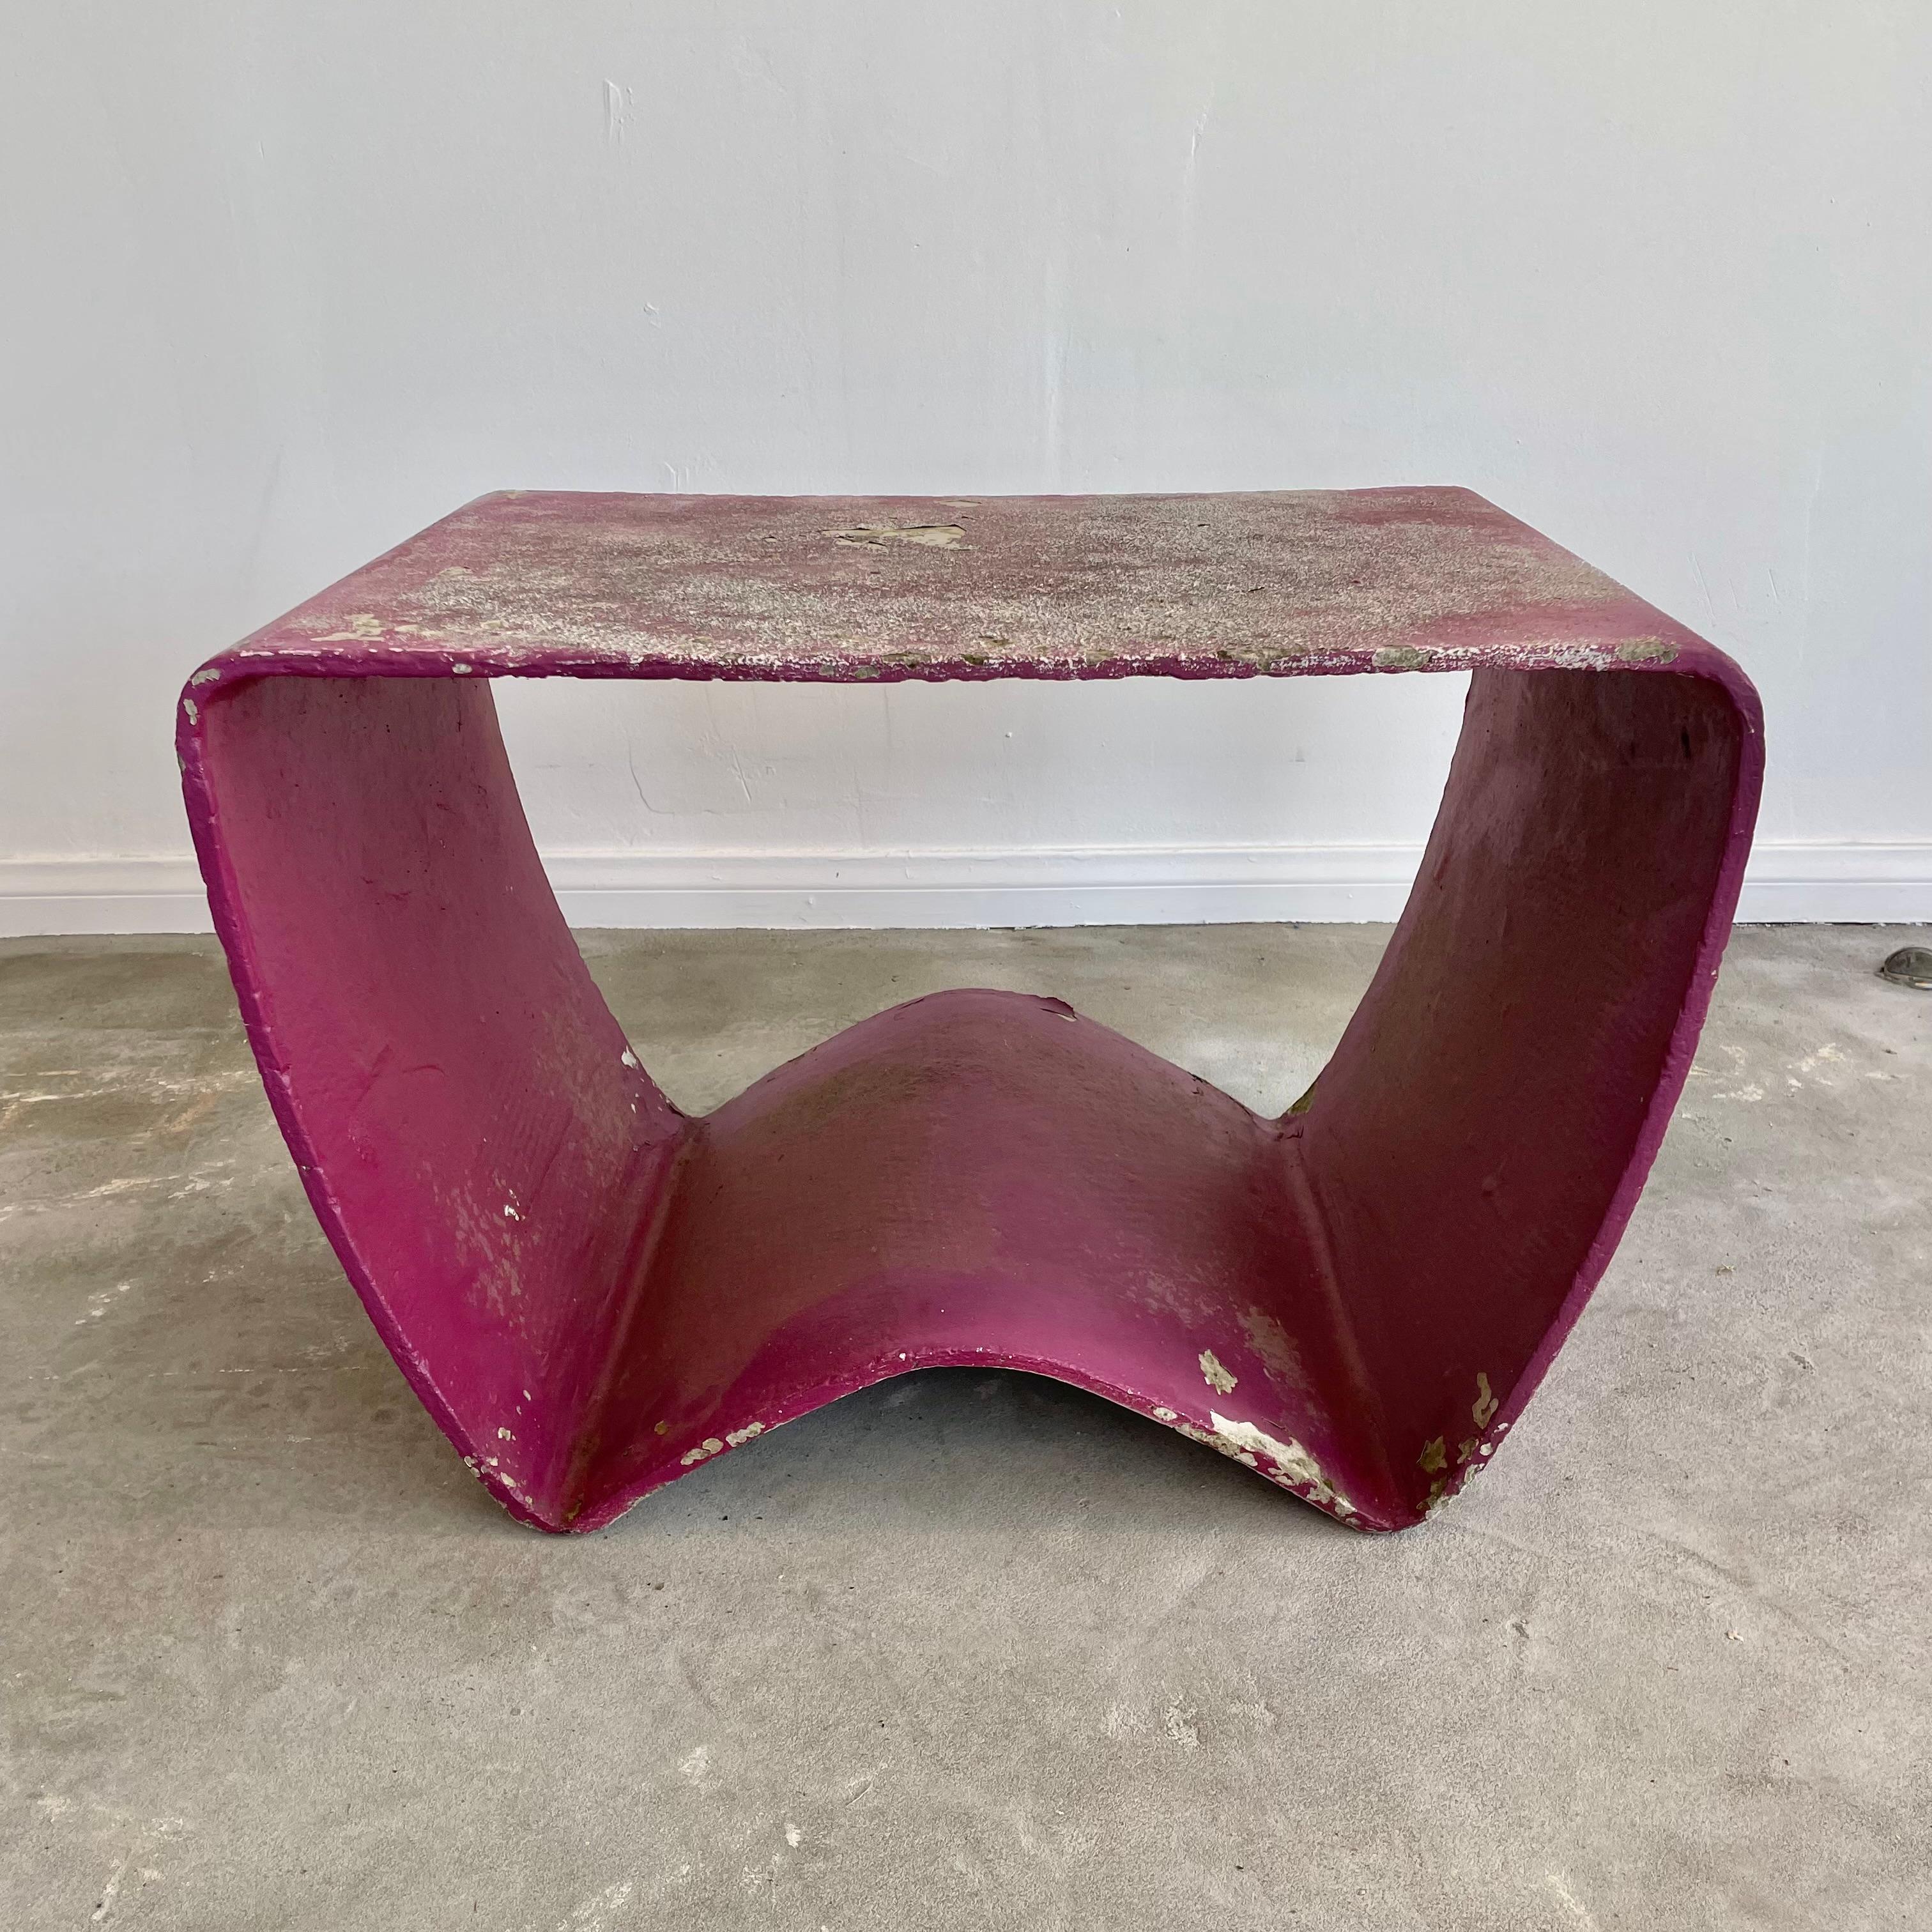 Mid-20th Century Concrete Stool by Ludwig Walser for Eternit, 1959, Switzerland For Sale